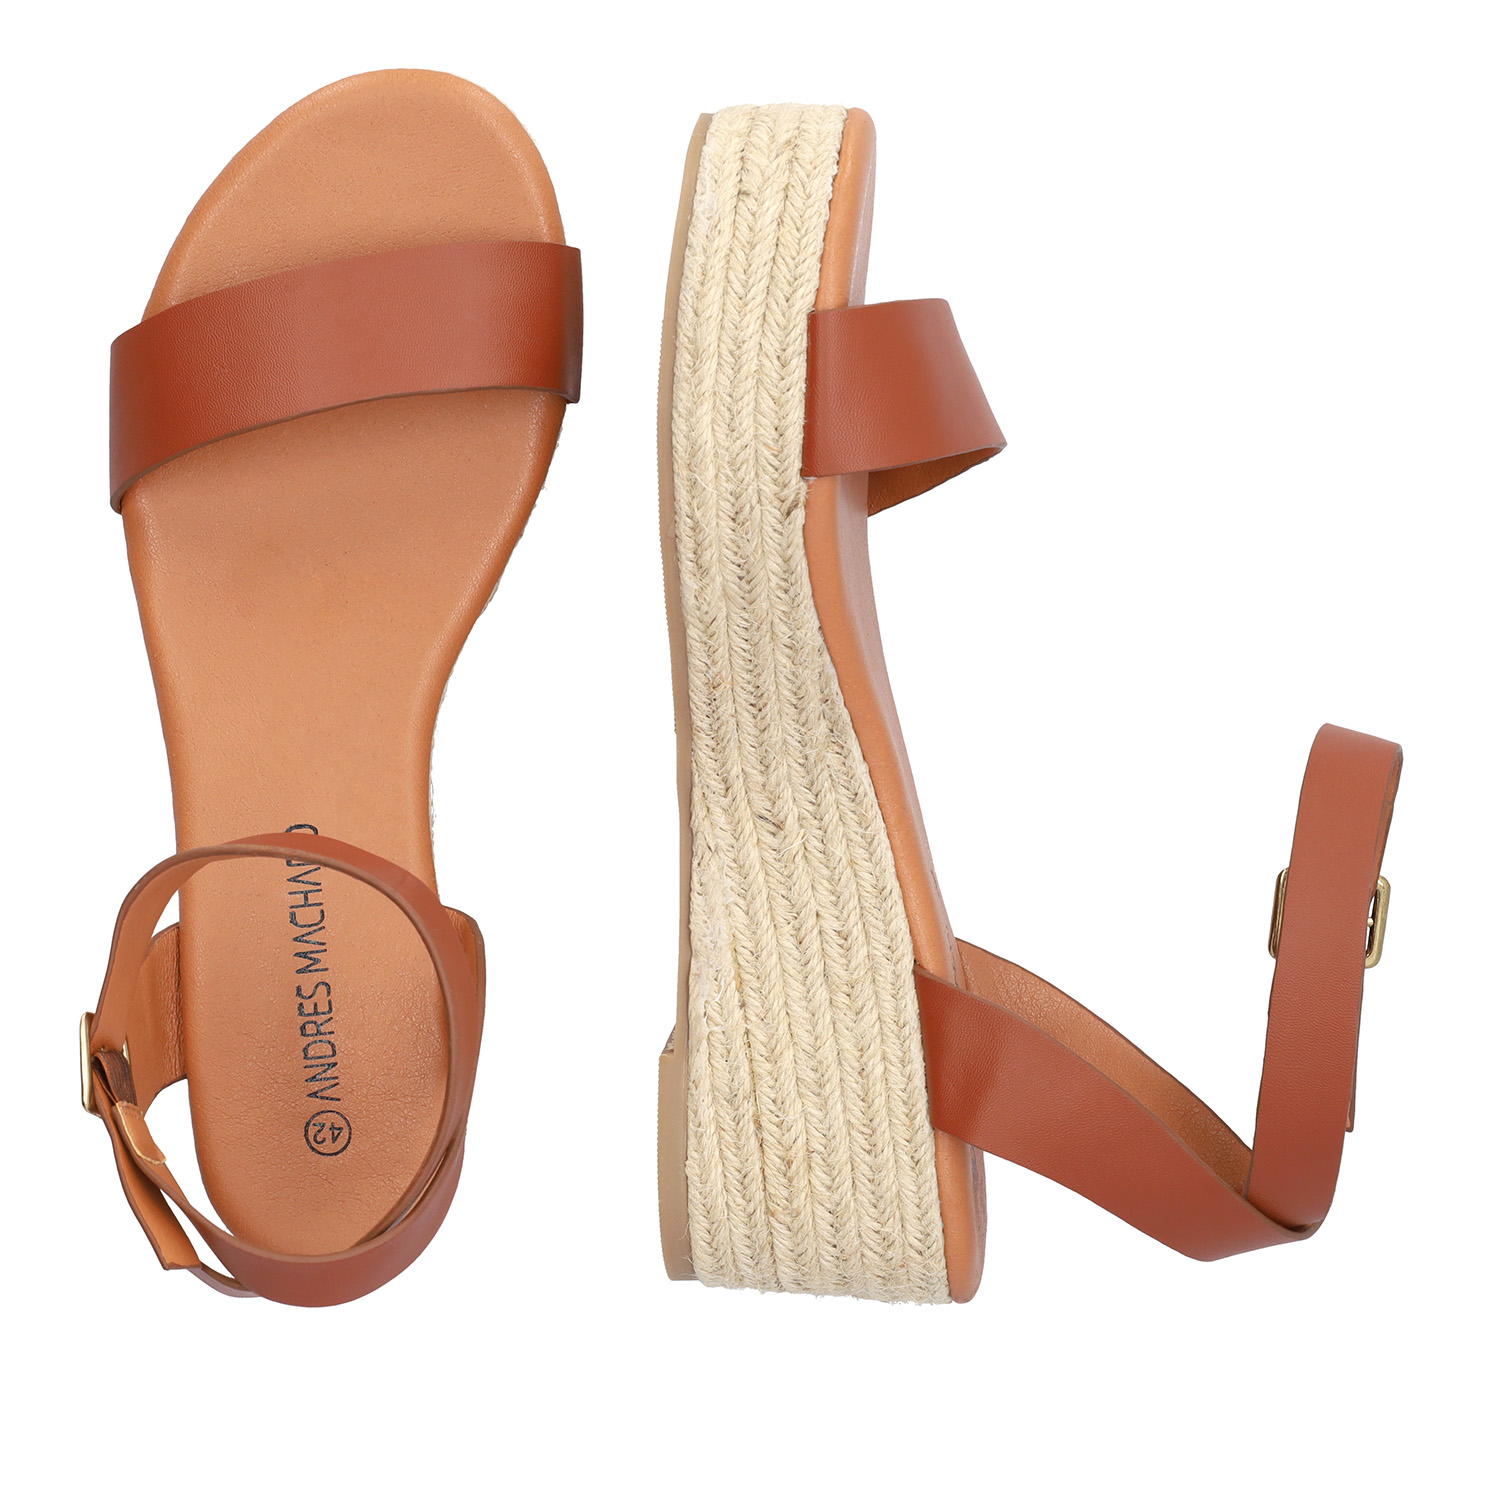 Brown soft sandals with a jute wedge 